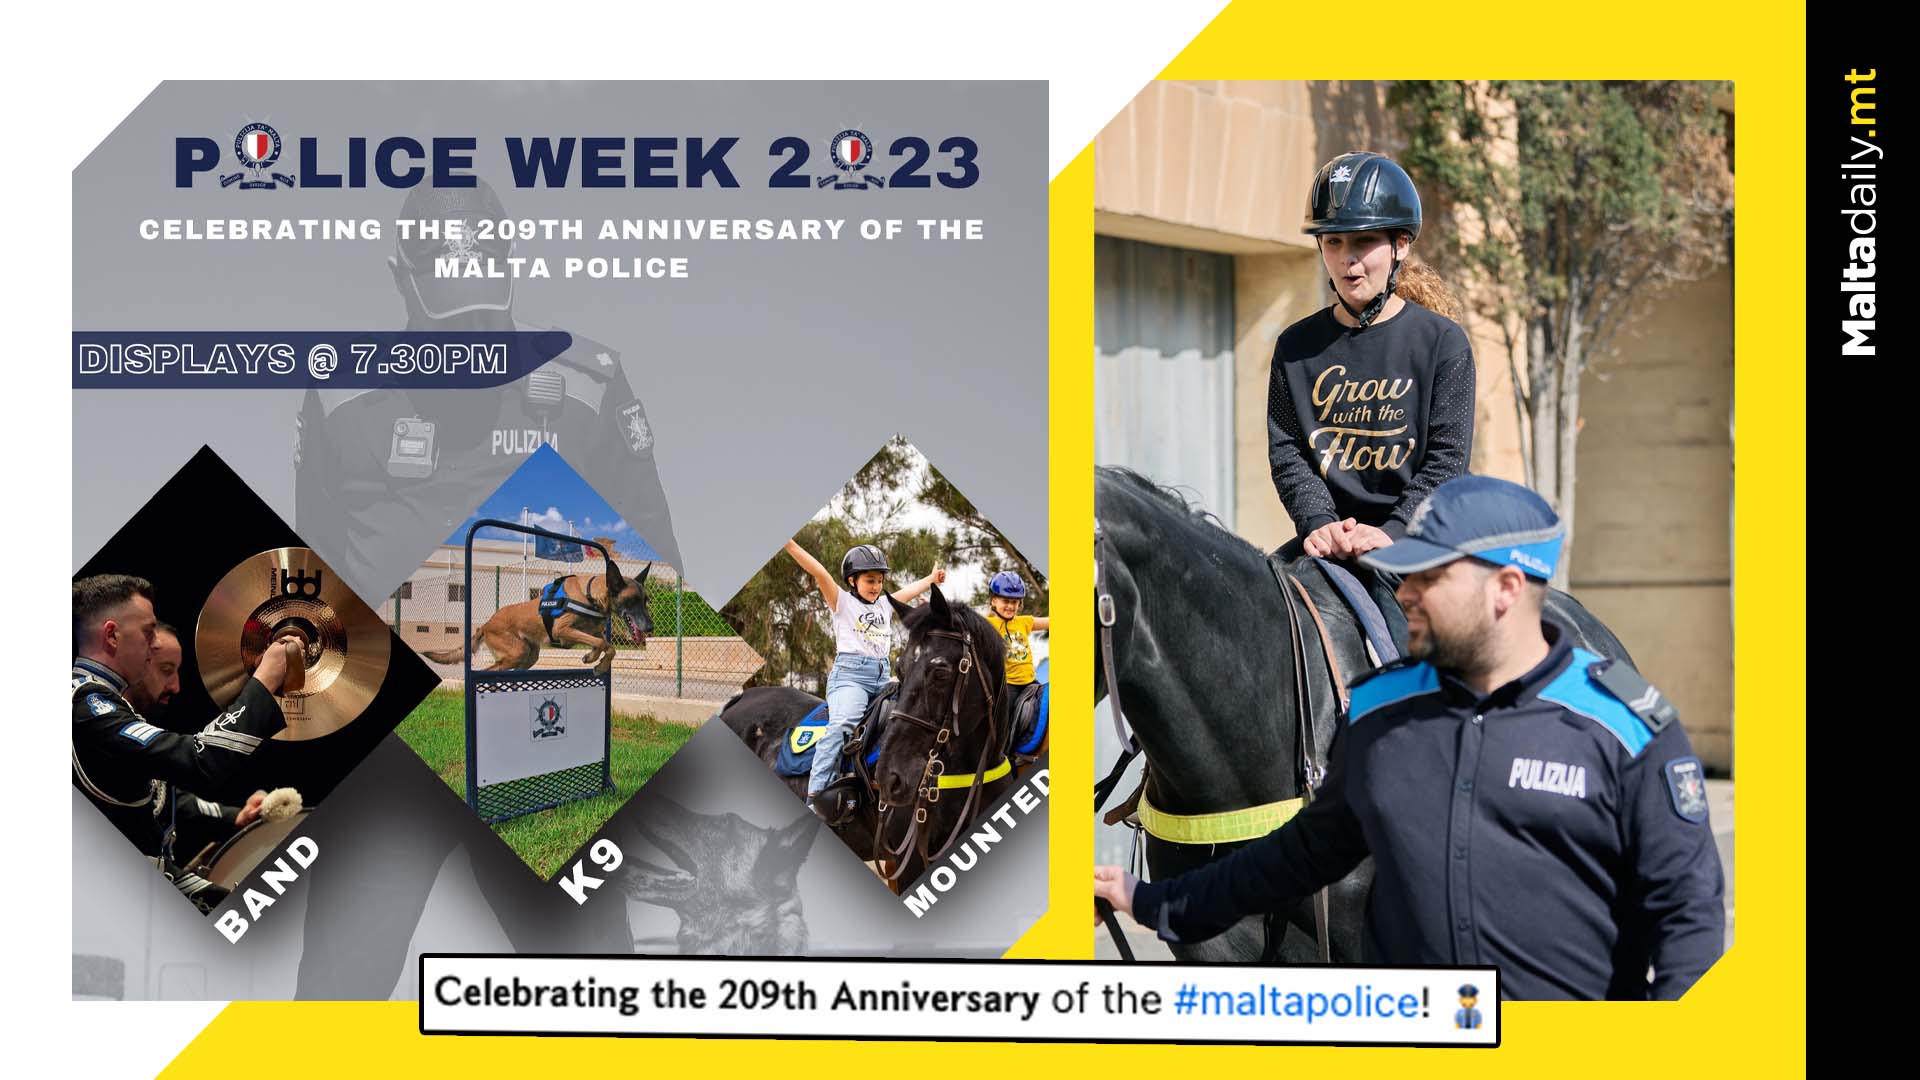 Week Of Events Celebrating 209th Malta Police Anniversary